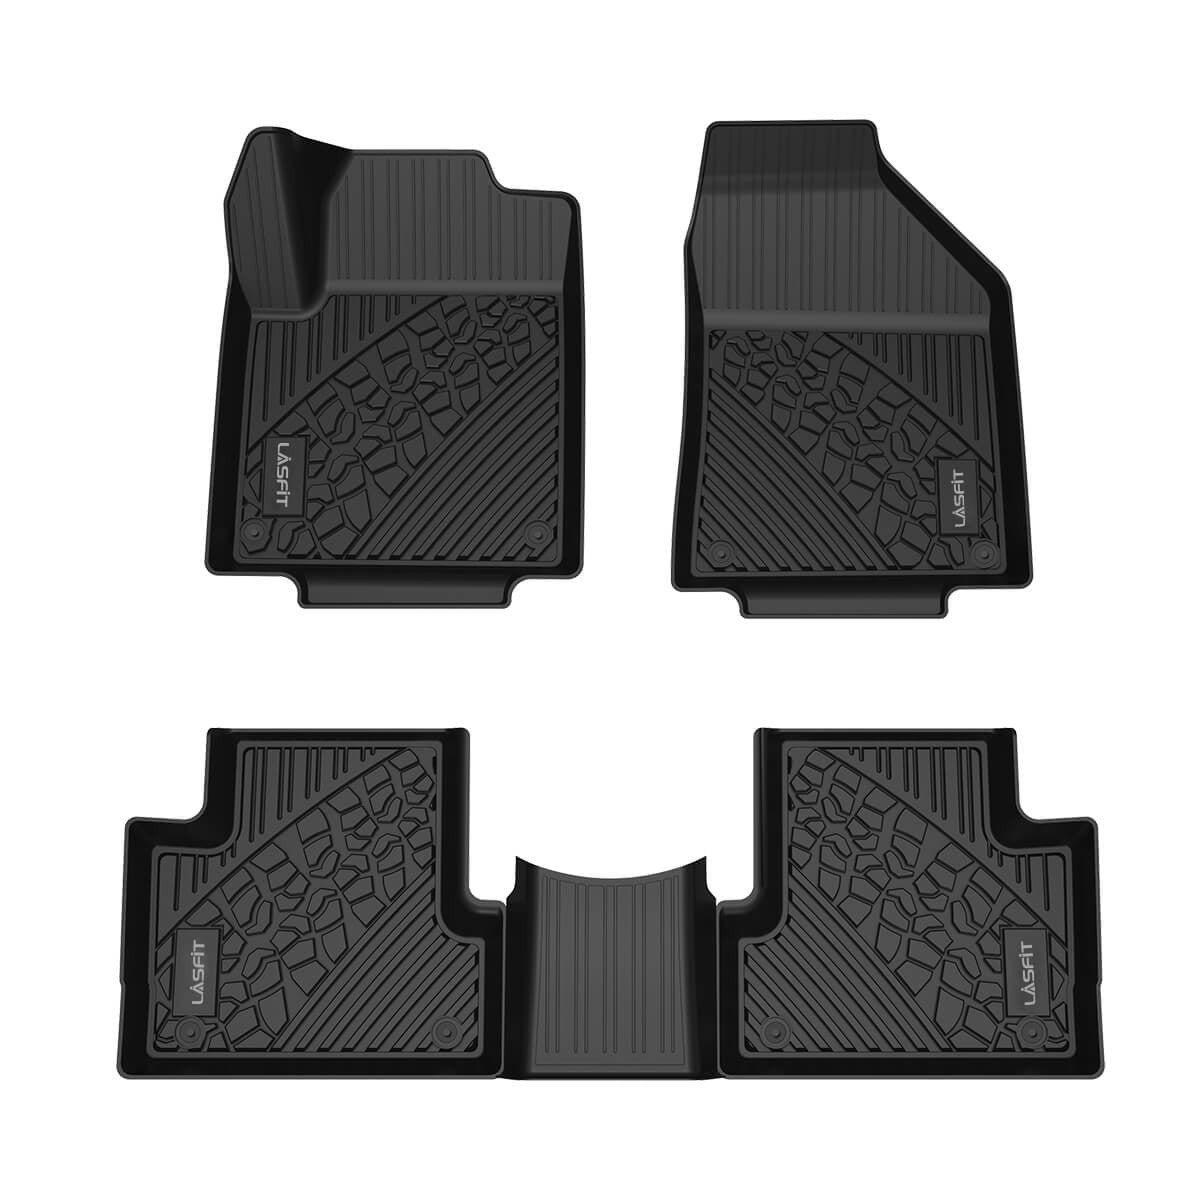 LASFIT Floor Mats for 2013-2015 Jeep Grand Cherokee, All Weather Fit TPE Floor Liners Set, 1st 2015 Jeep Grand Cherokee All Weather Floor Mats